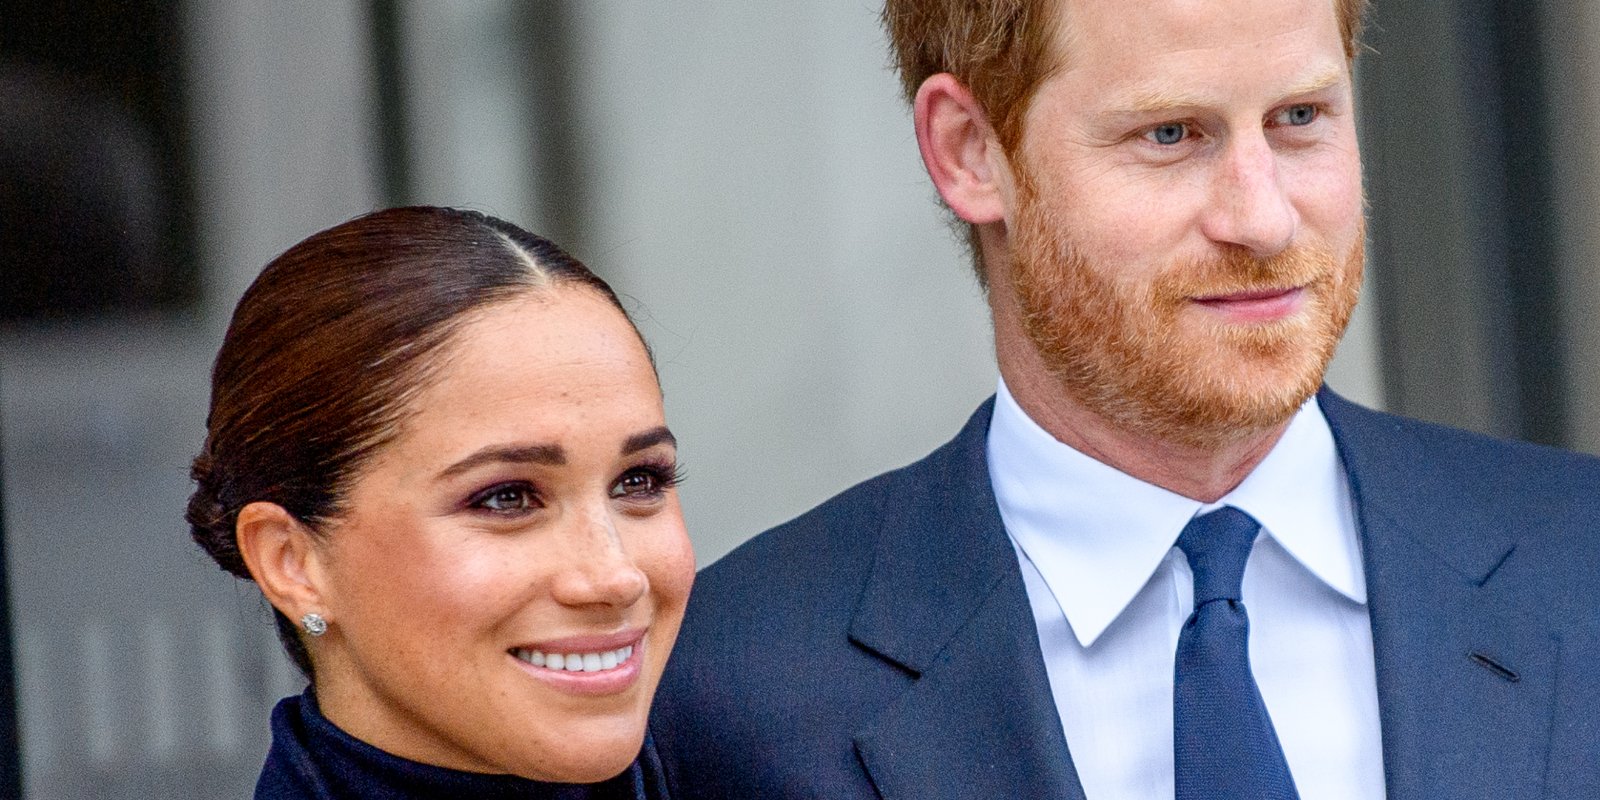 Meghan Markle and Prince Harry visit One World Observatory in New York City in 2021.